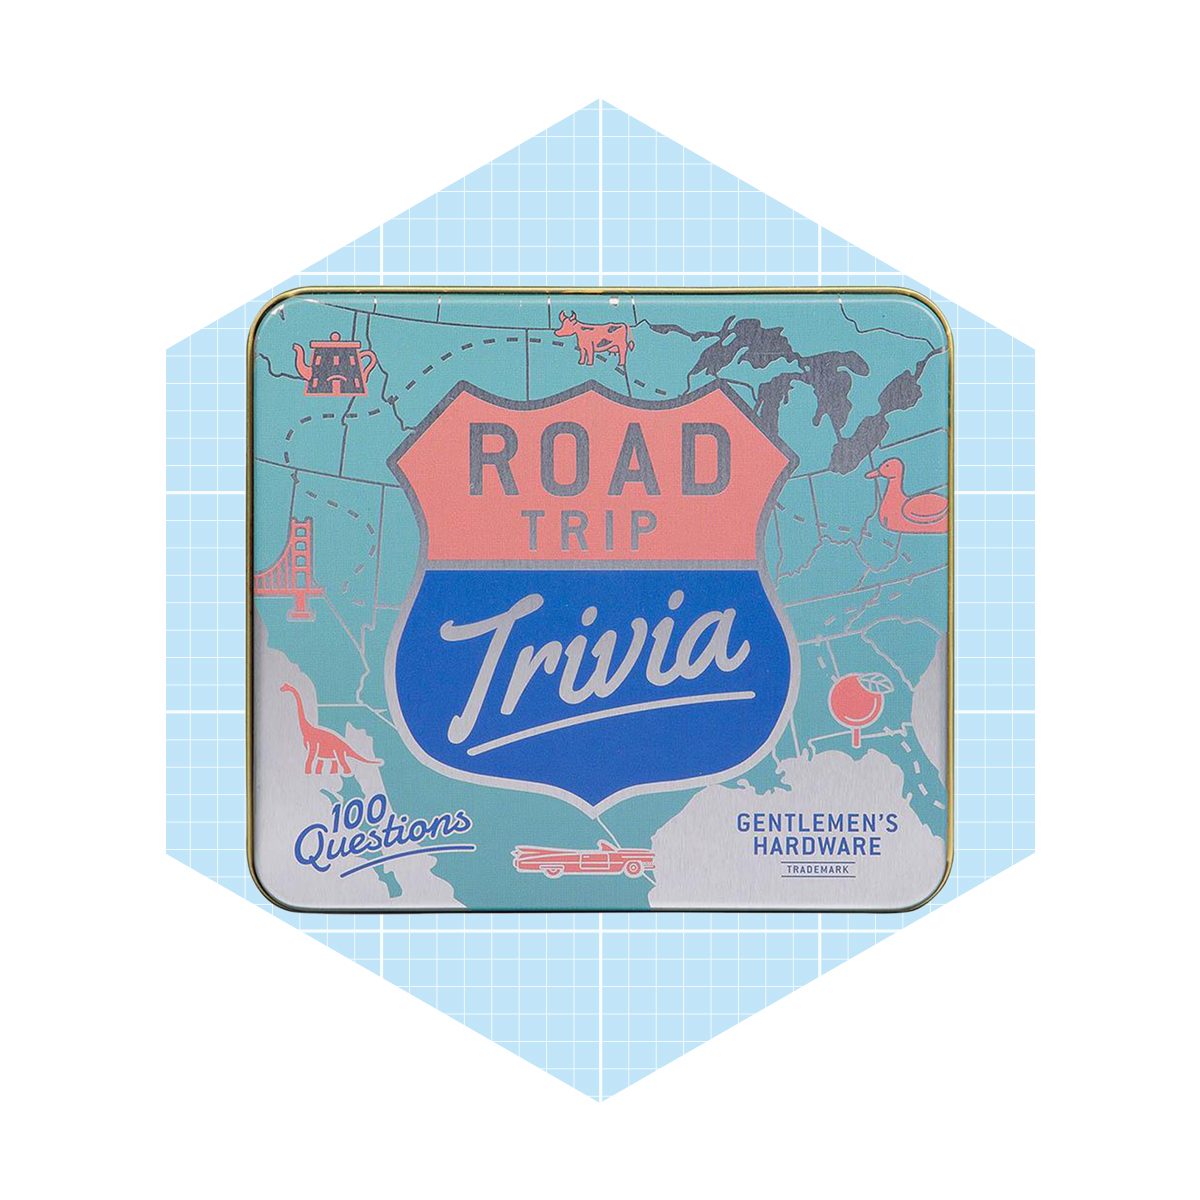 <p>Long road trips can become tedious, but with the <a href="https://www.anthropologie.com/anthroliving/shop/road-trip-trivia-cards?color=000&size=One%20Size&inventoryCountry=US&countryCode=US&type=STANDARD&quantity=1" rel="noopener">Gentlemen's Hardware American Road Trip Trivia Game,</a> there are hours of fun and entertainment to be had. This game has 1000 <a href="https://www.familyhandyman.com/list/amazing-facts-about-boring-objects-in-your-home/" rel="noopener noreferrer">trivia questions</a> designed to be engaging and challenging. Questions cover a wide range of topics like history, geography and pop culture. Learn a few facts and have some fun at the same time!</p> <p class="listicle-page__cta-button-shop"><a class="shop-btn" href="https://www.anthropologie.com/anthroliving/shop/road-trip-trivia-cards?color=000&size=One%20Size&inventoryCountry=US&countryCode=US&type=STANDARD&quantity=1">Shop Now</a></p>